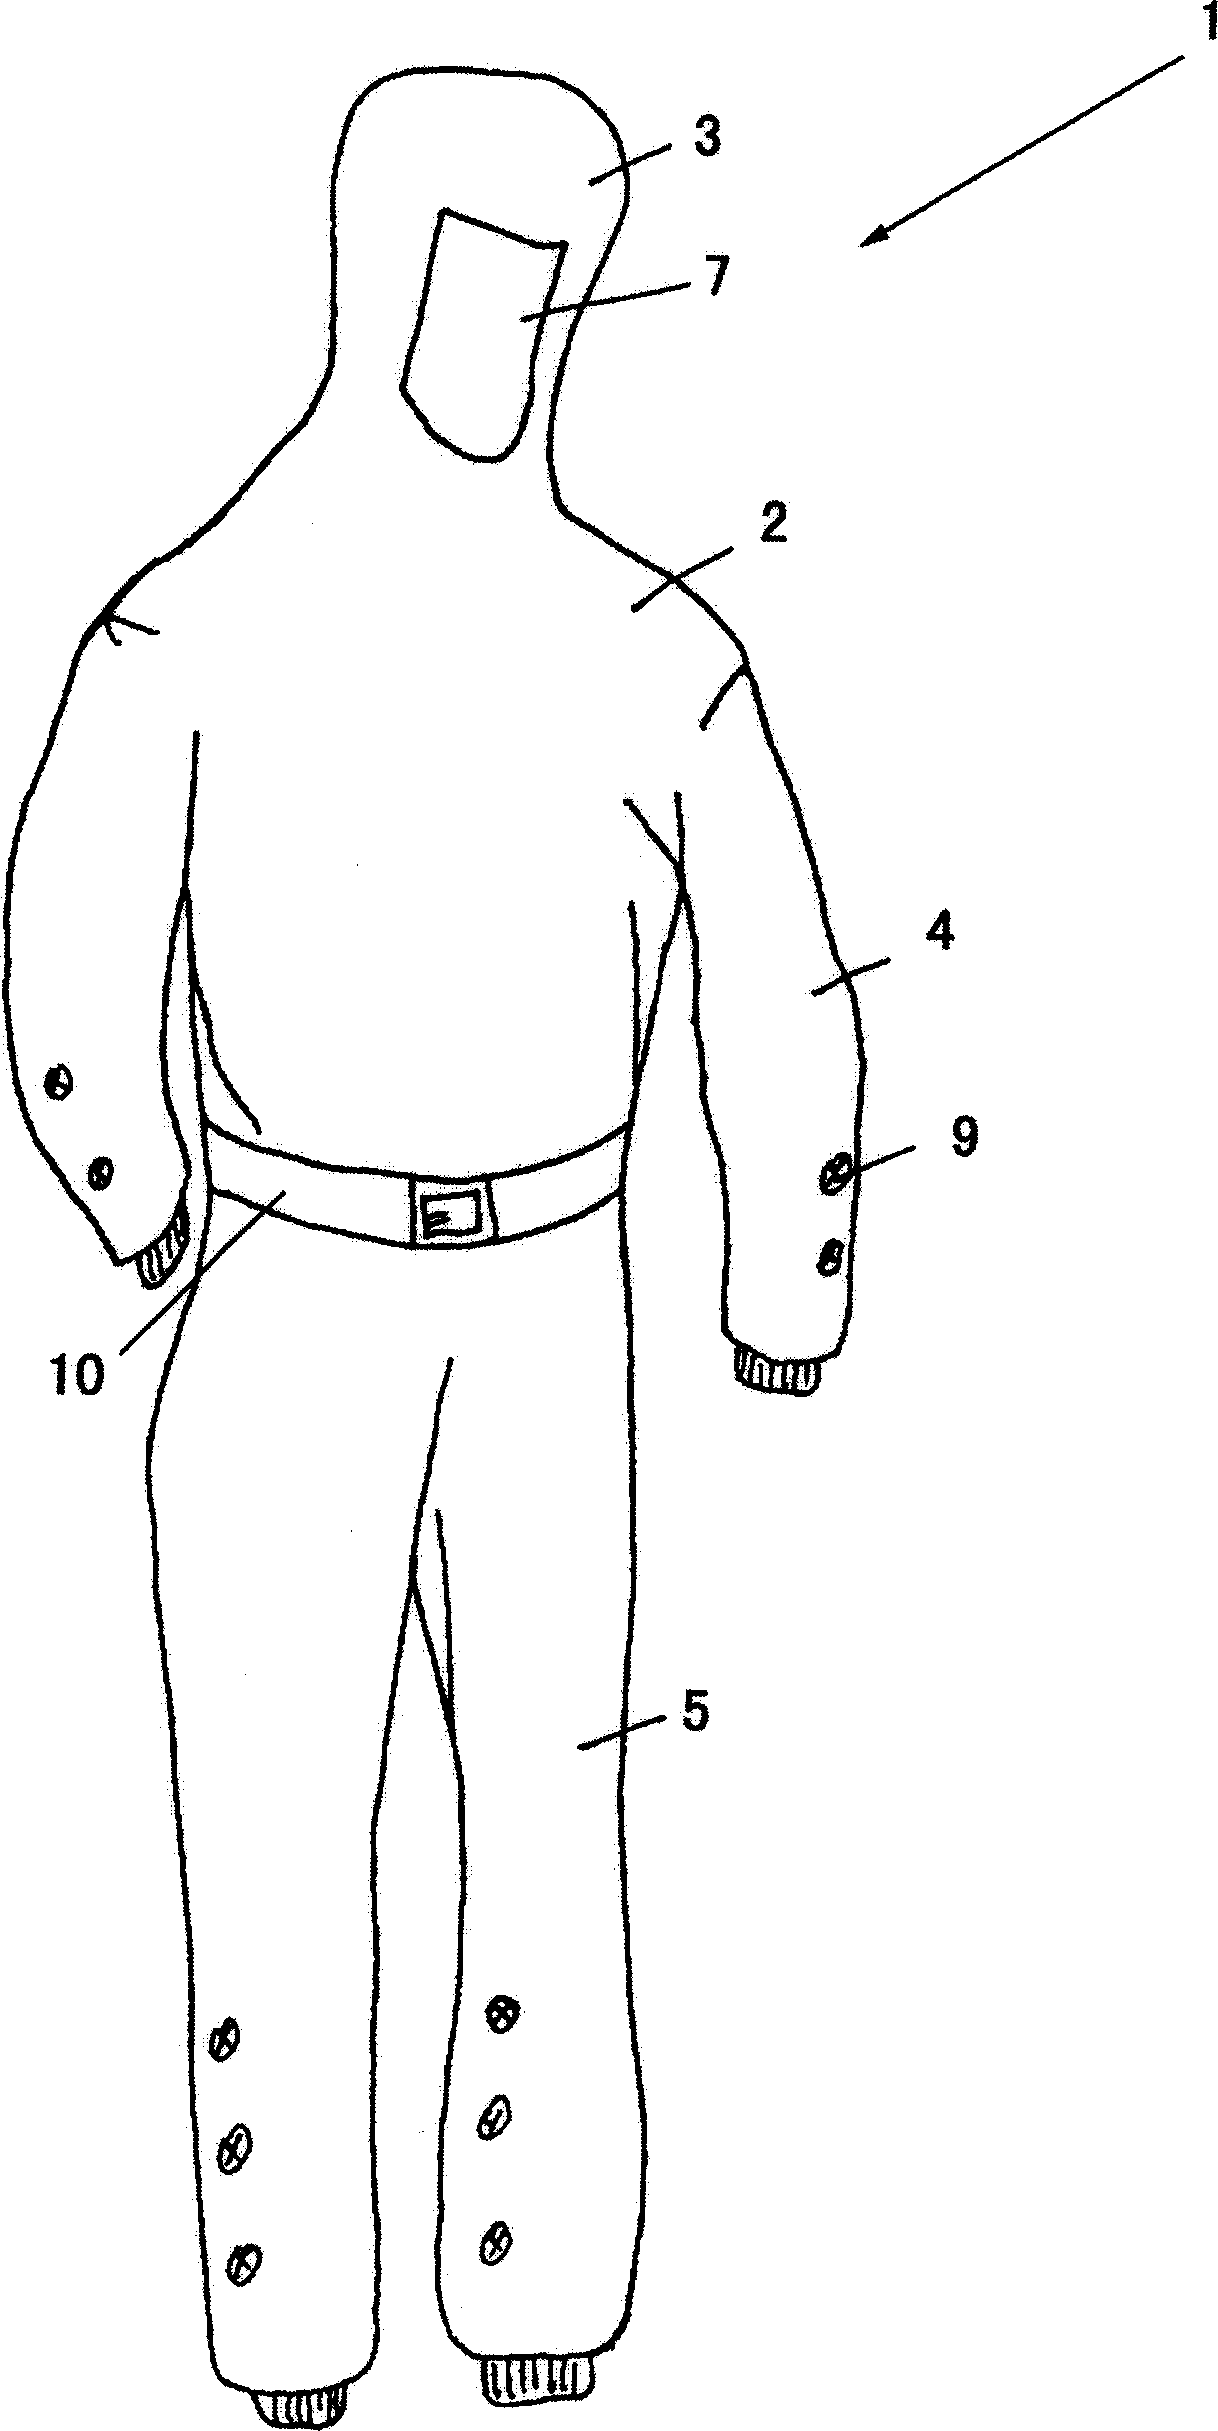 Isolation clothes for epidemic disease